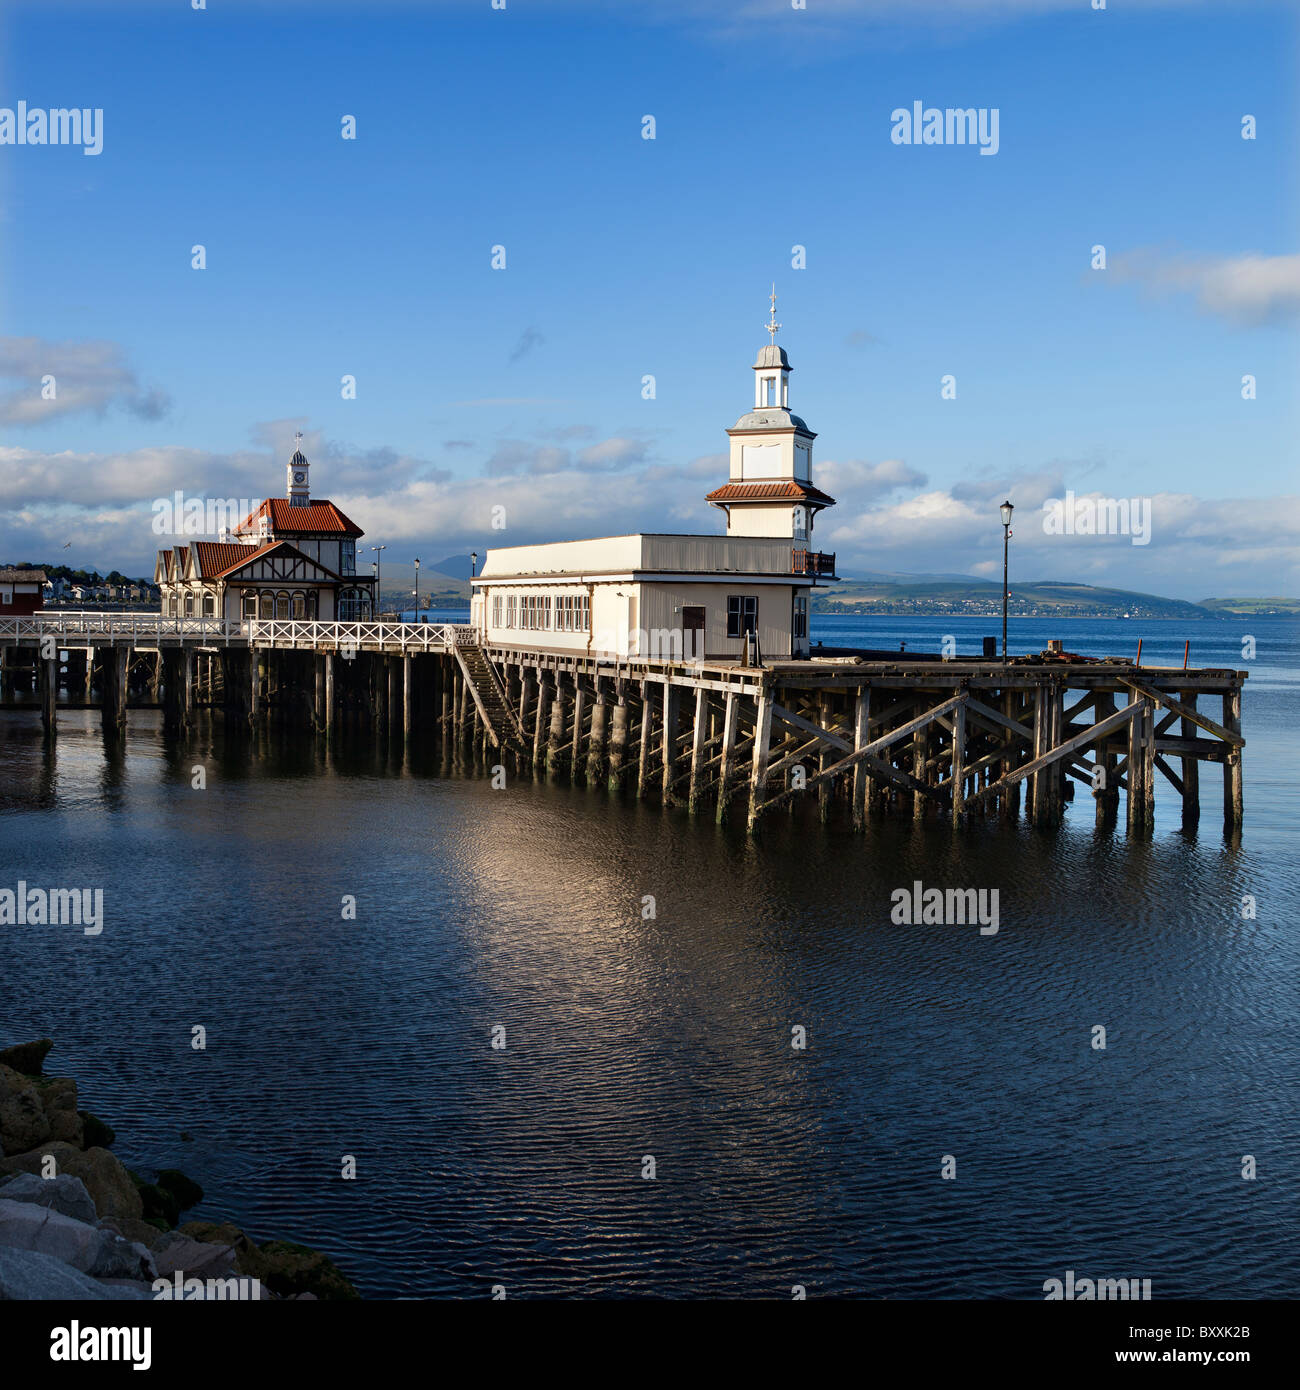 Pier at Dunoon Scotland Stock Photo